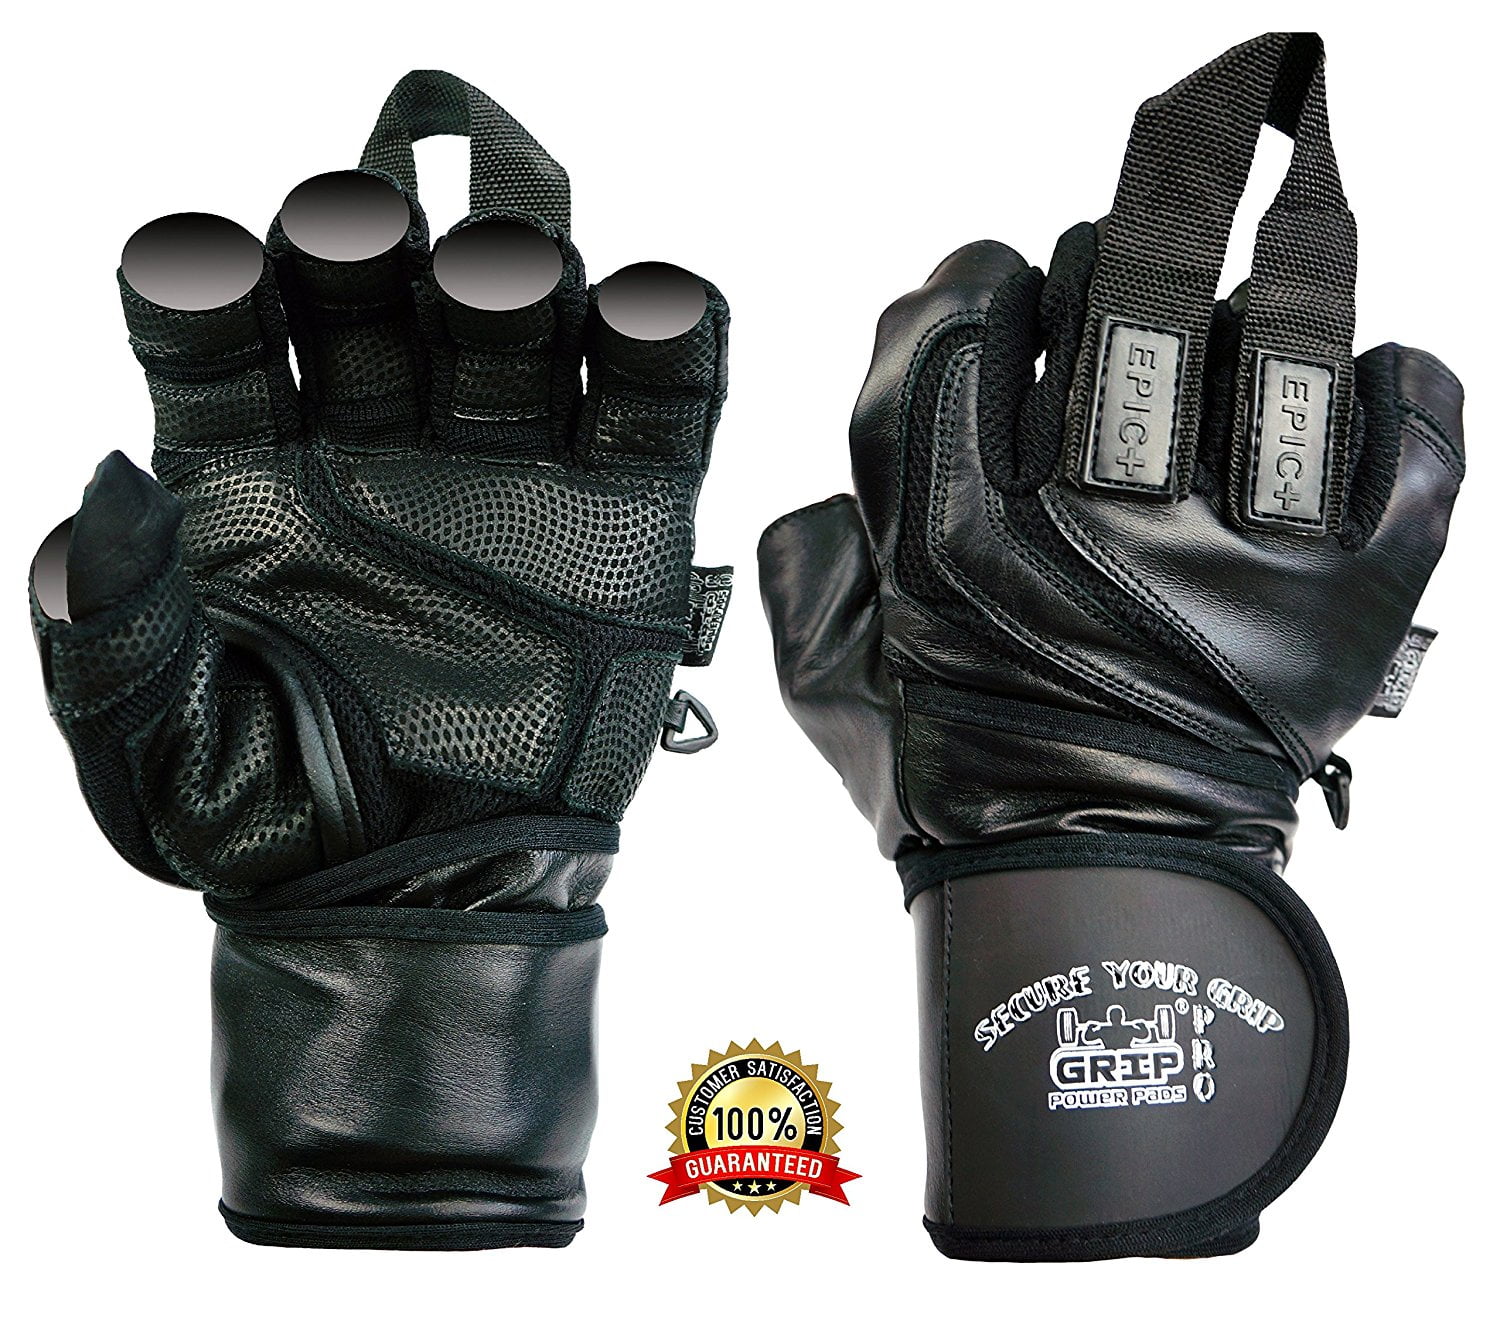 Farabi Weight Lifting Gloves Straps Fitness workout Fitness Gel Black Leather 